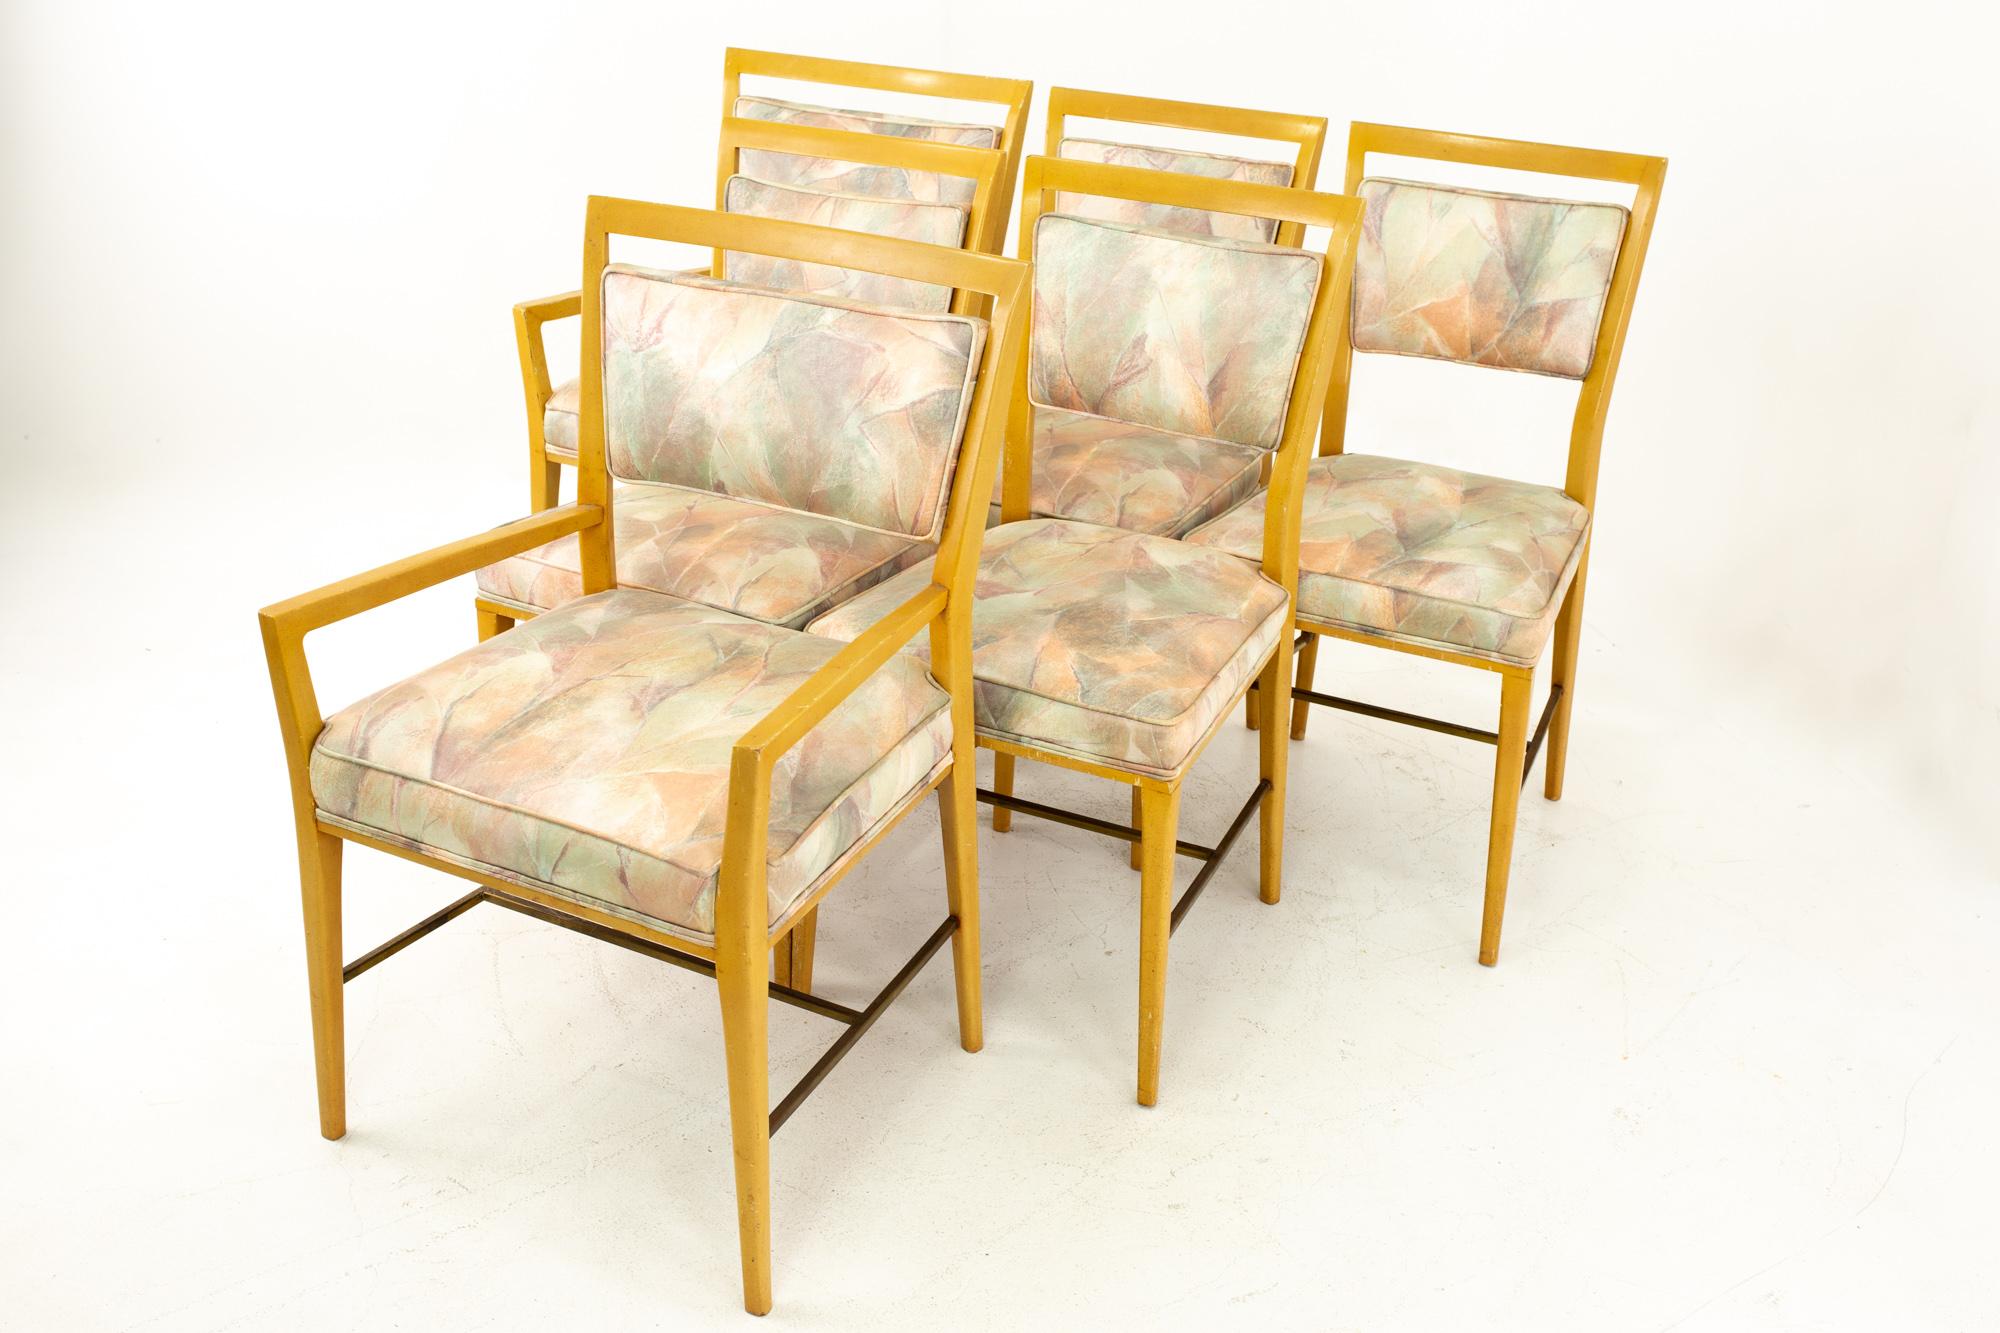 Paul McCobb Mid Century blonde upholstered dining chairs, set of 6

Each chair measures: 22.5 wide x 19.5 deep x 36 high with a seat height of 19 inches 

This set is available in what we call restored vintage condition. Upon purchase it is fixed so